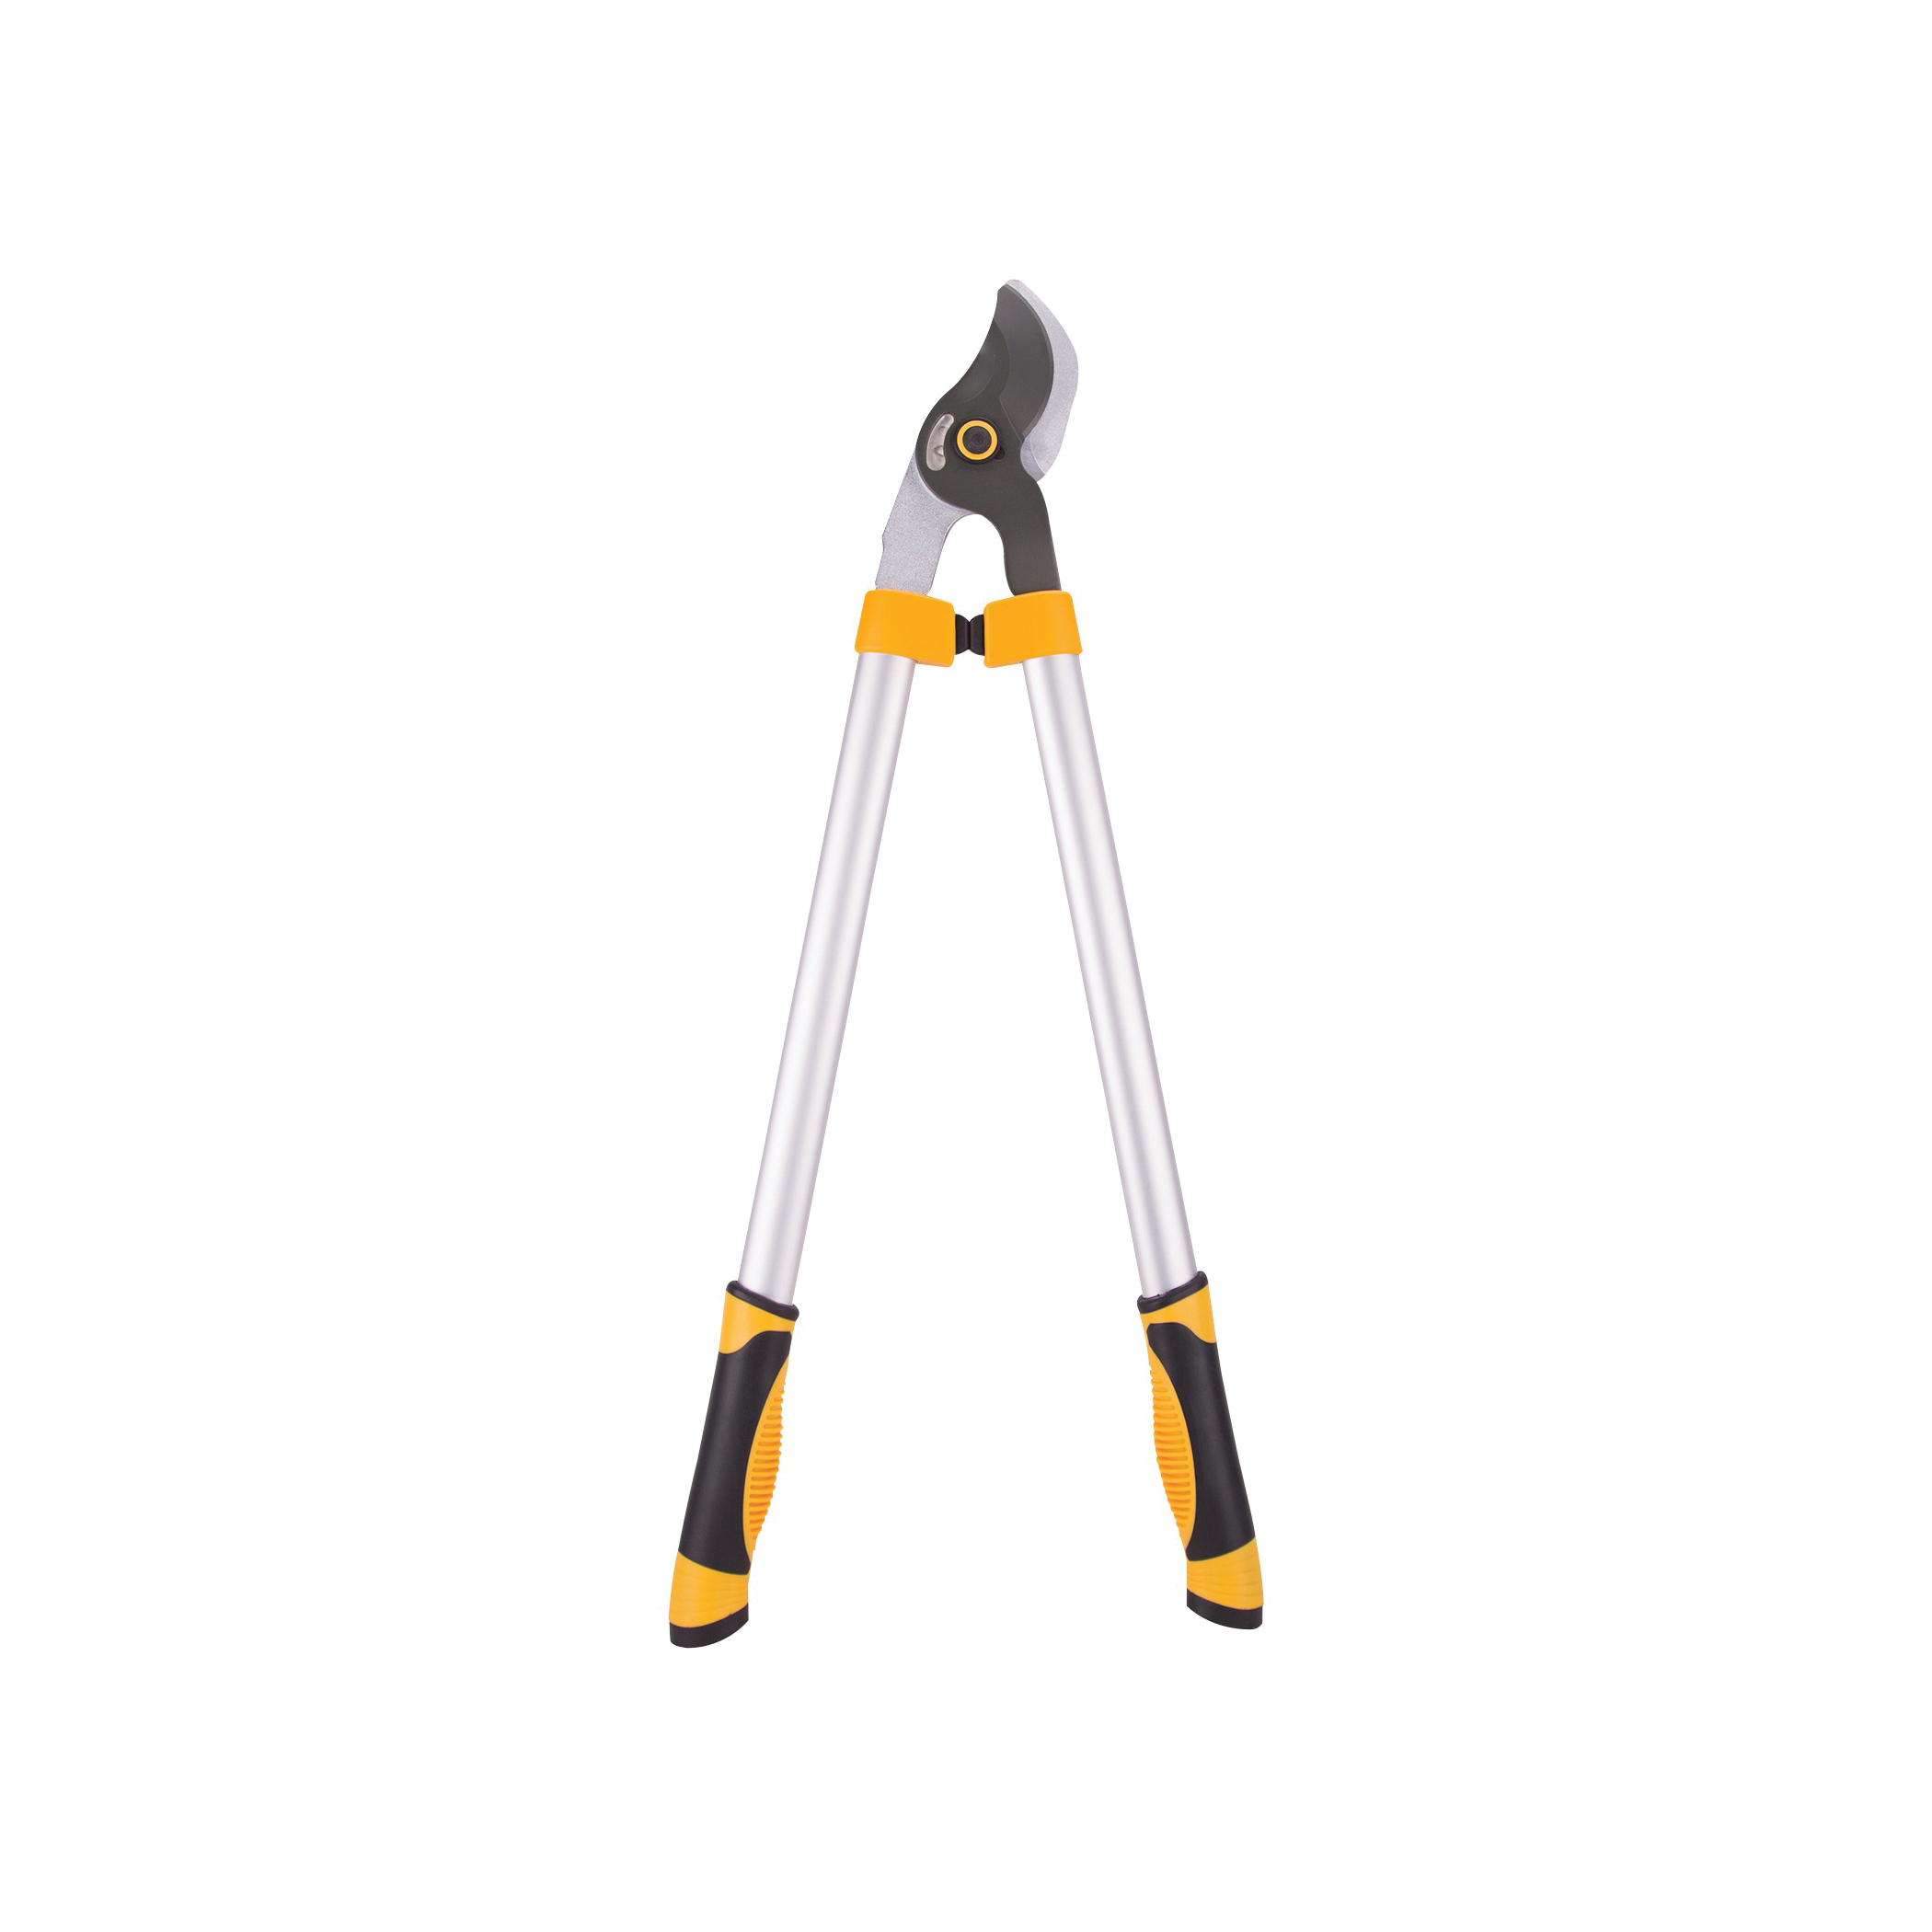 PS10041000 Lopper, 1-1/2 in Cutting Capacity, Steel Blade, Aluminum Handle, Cushion grip Handle